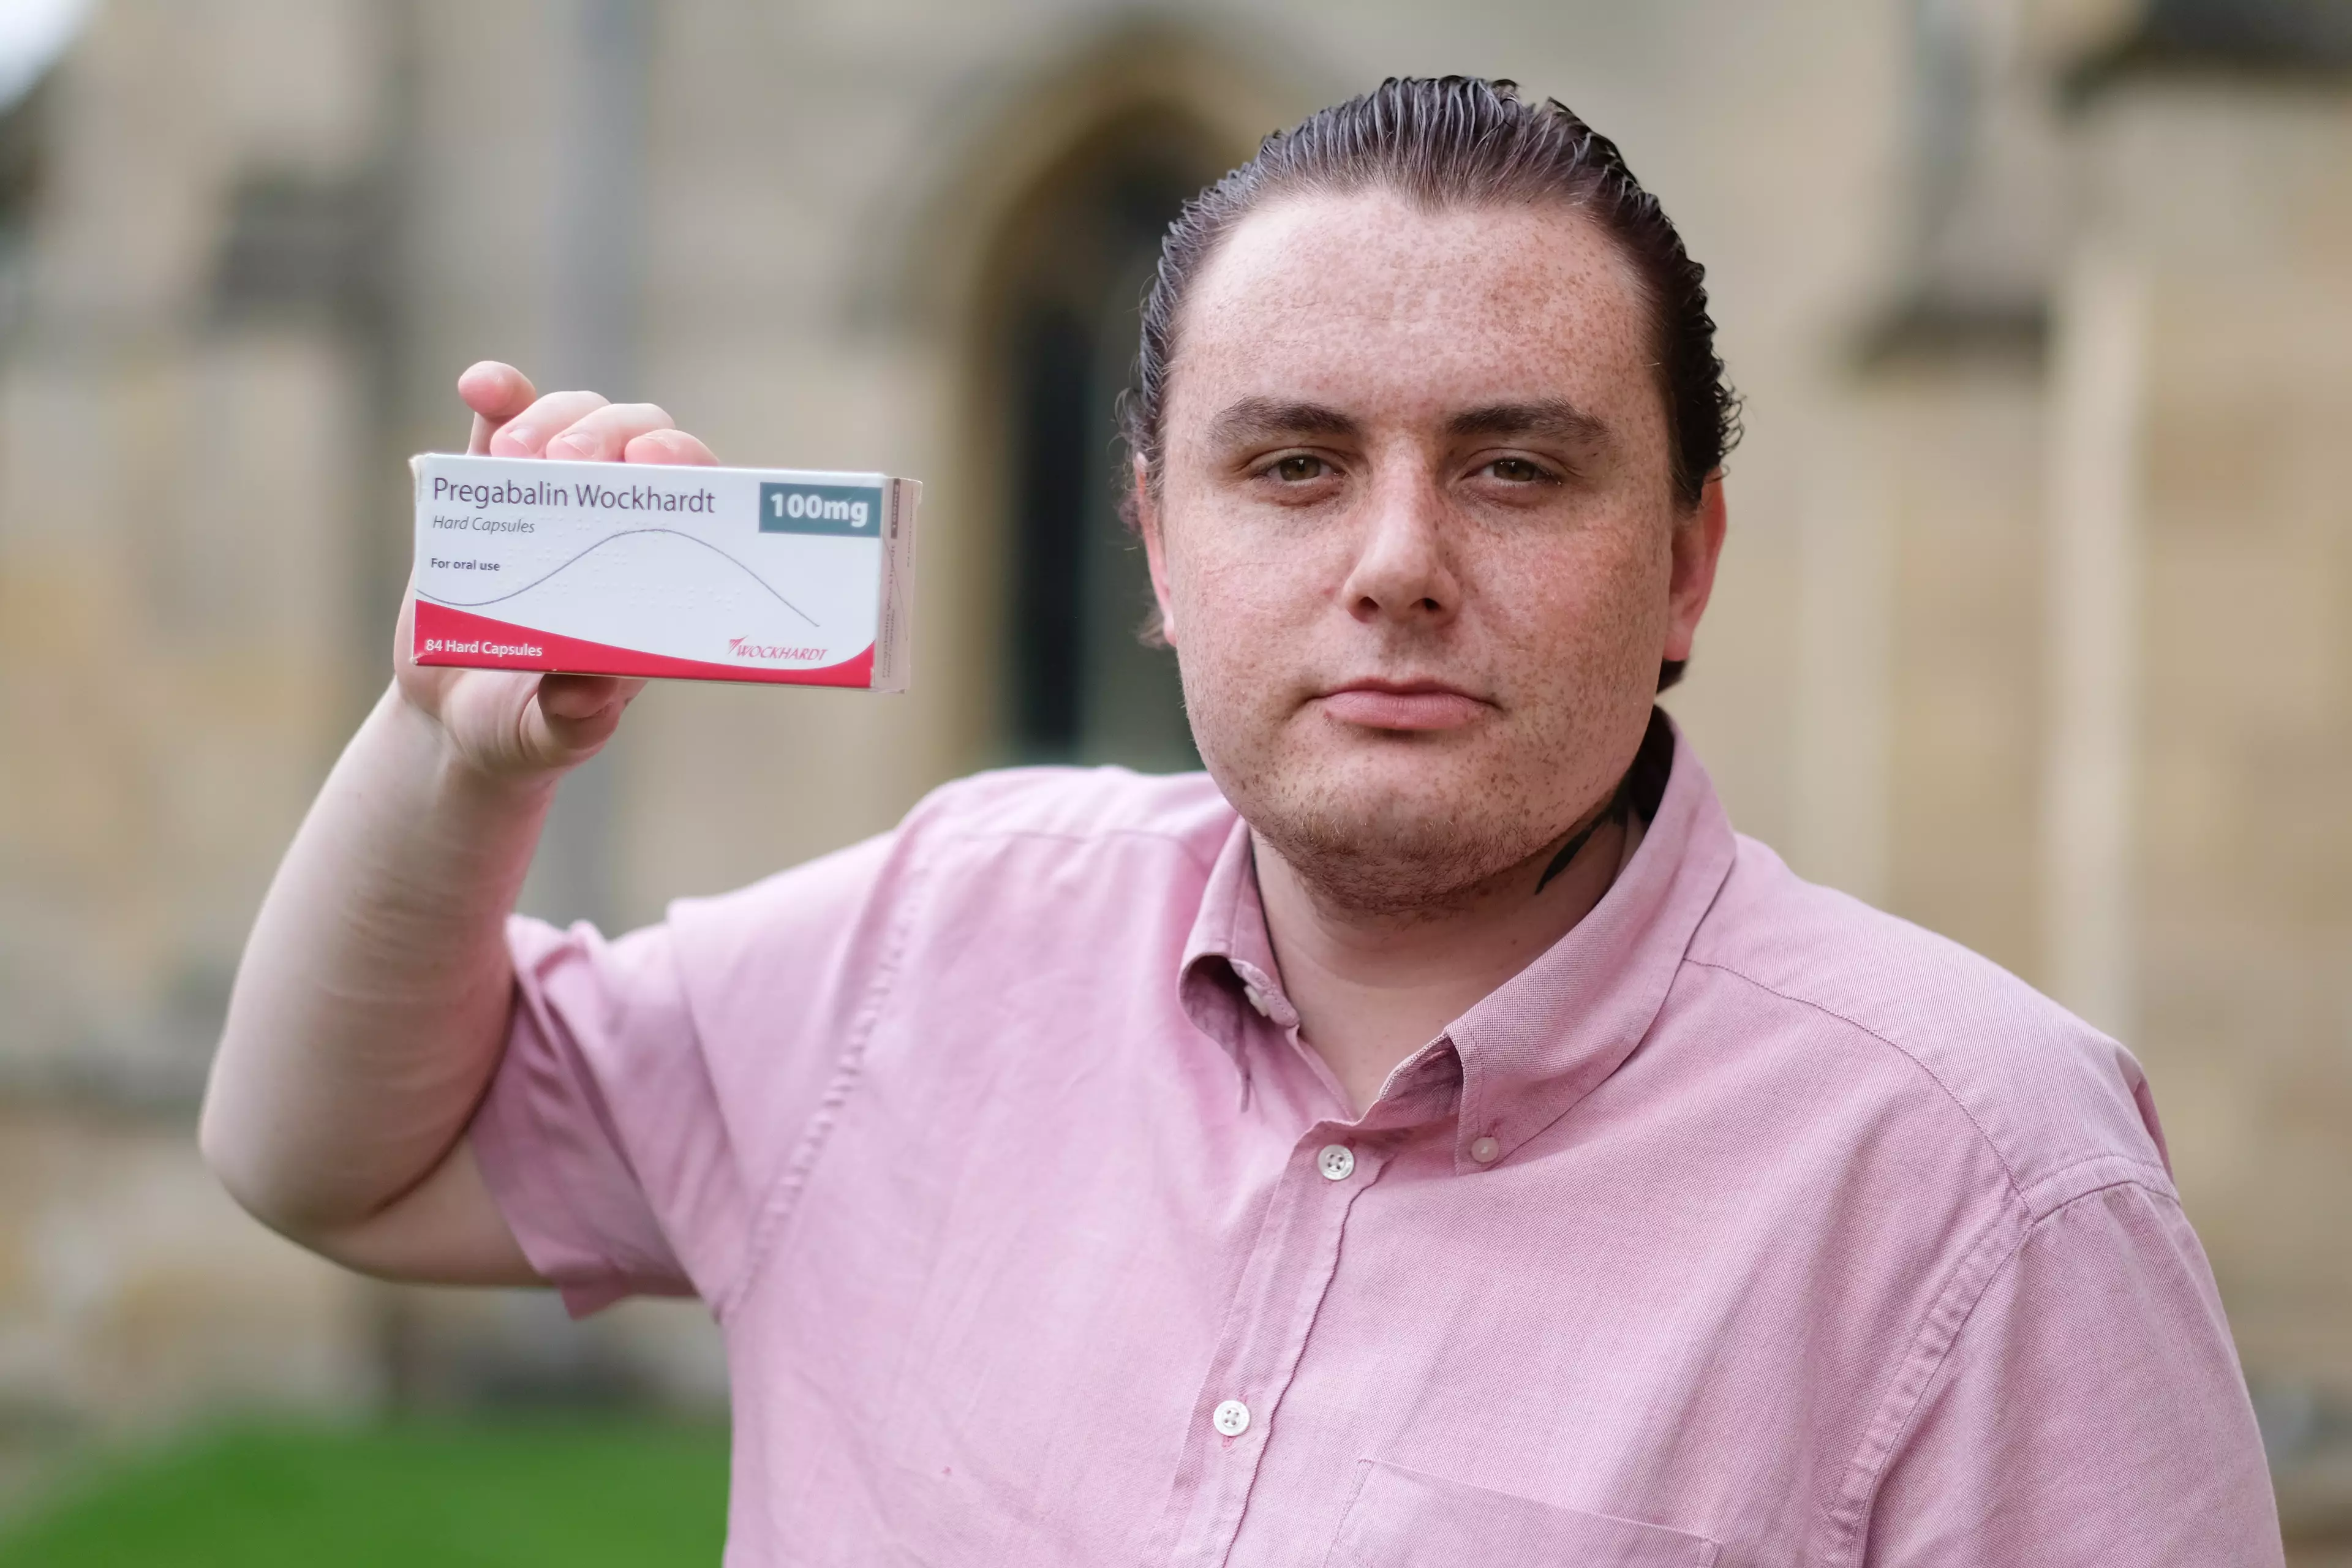 Dad Of Man Who Claims Painkiller 'Turned Him Gay' Says Son Always Liked Men 